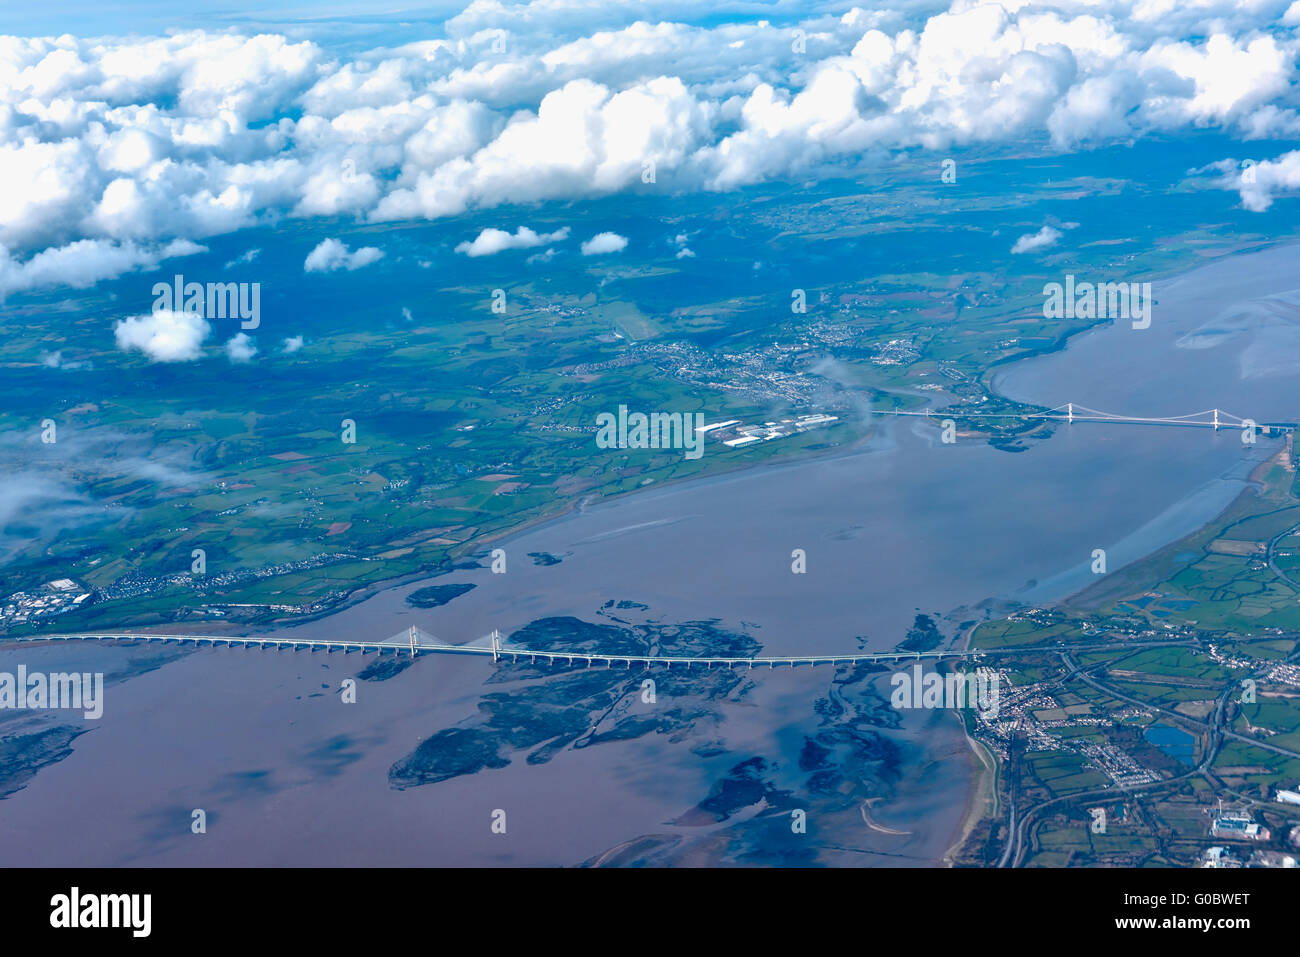 Aerial view River Severn Estuary with old and new Severn road bridges, between England and Wales Stock Photo